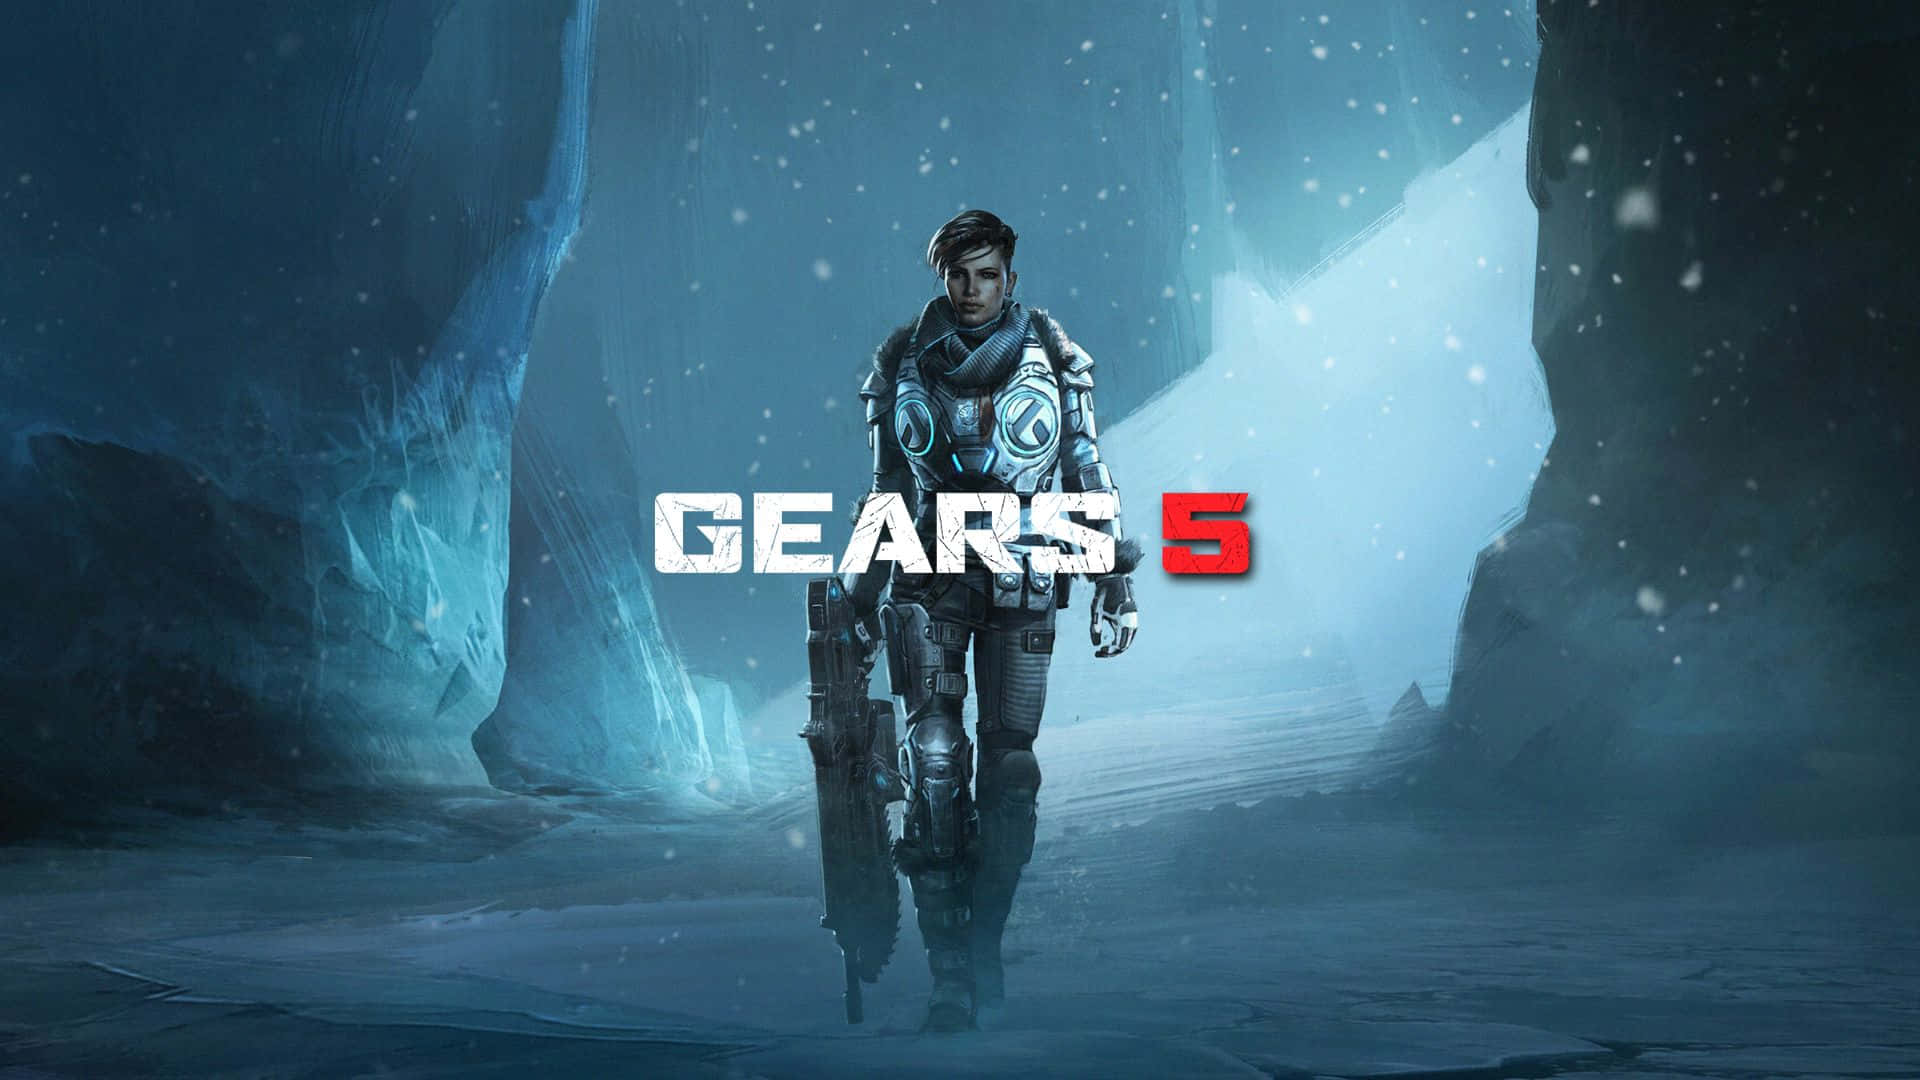 Prepare for an Epic Entertainement in Gears of War 5